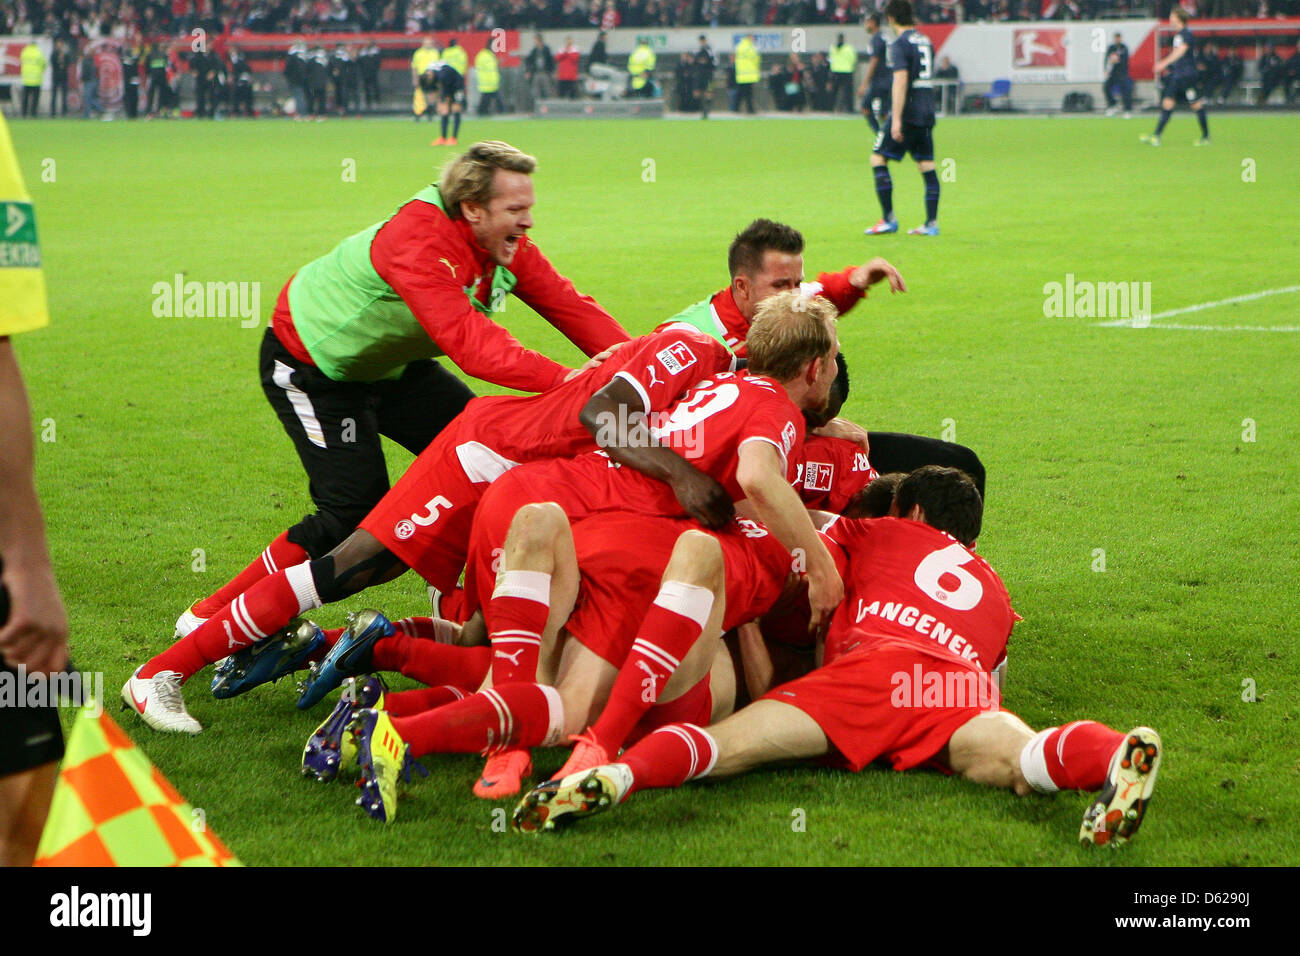 Duesseldorf's team celebrates after winning the Bundesliga relegation soccer match between Fortuna Duesseldorf and Hertha BSC at the Esprit-Arena in Duesseldorf, Germany, 15 May 2012. Photo:  Revierfoto Stock Photo